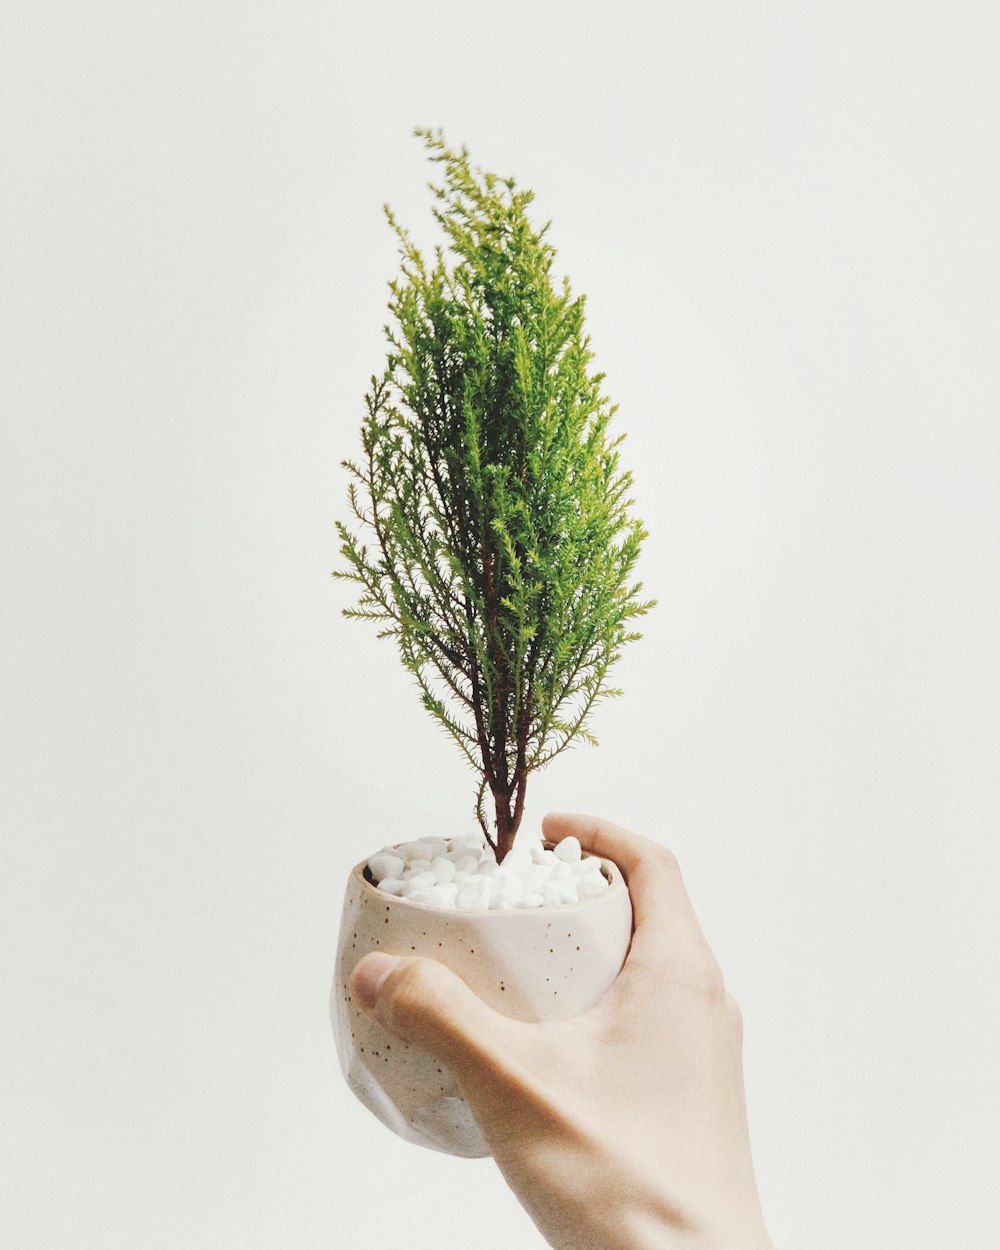 person holding vase of green leafed plant